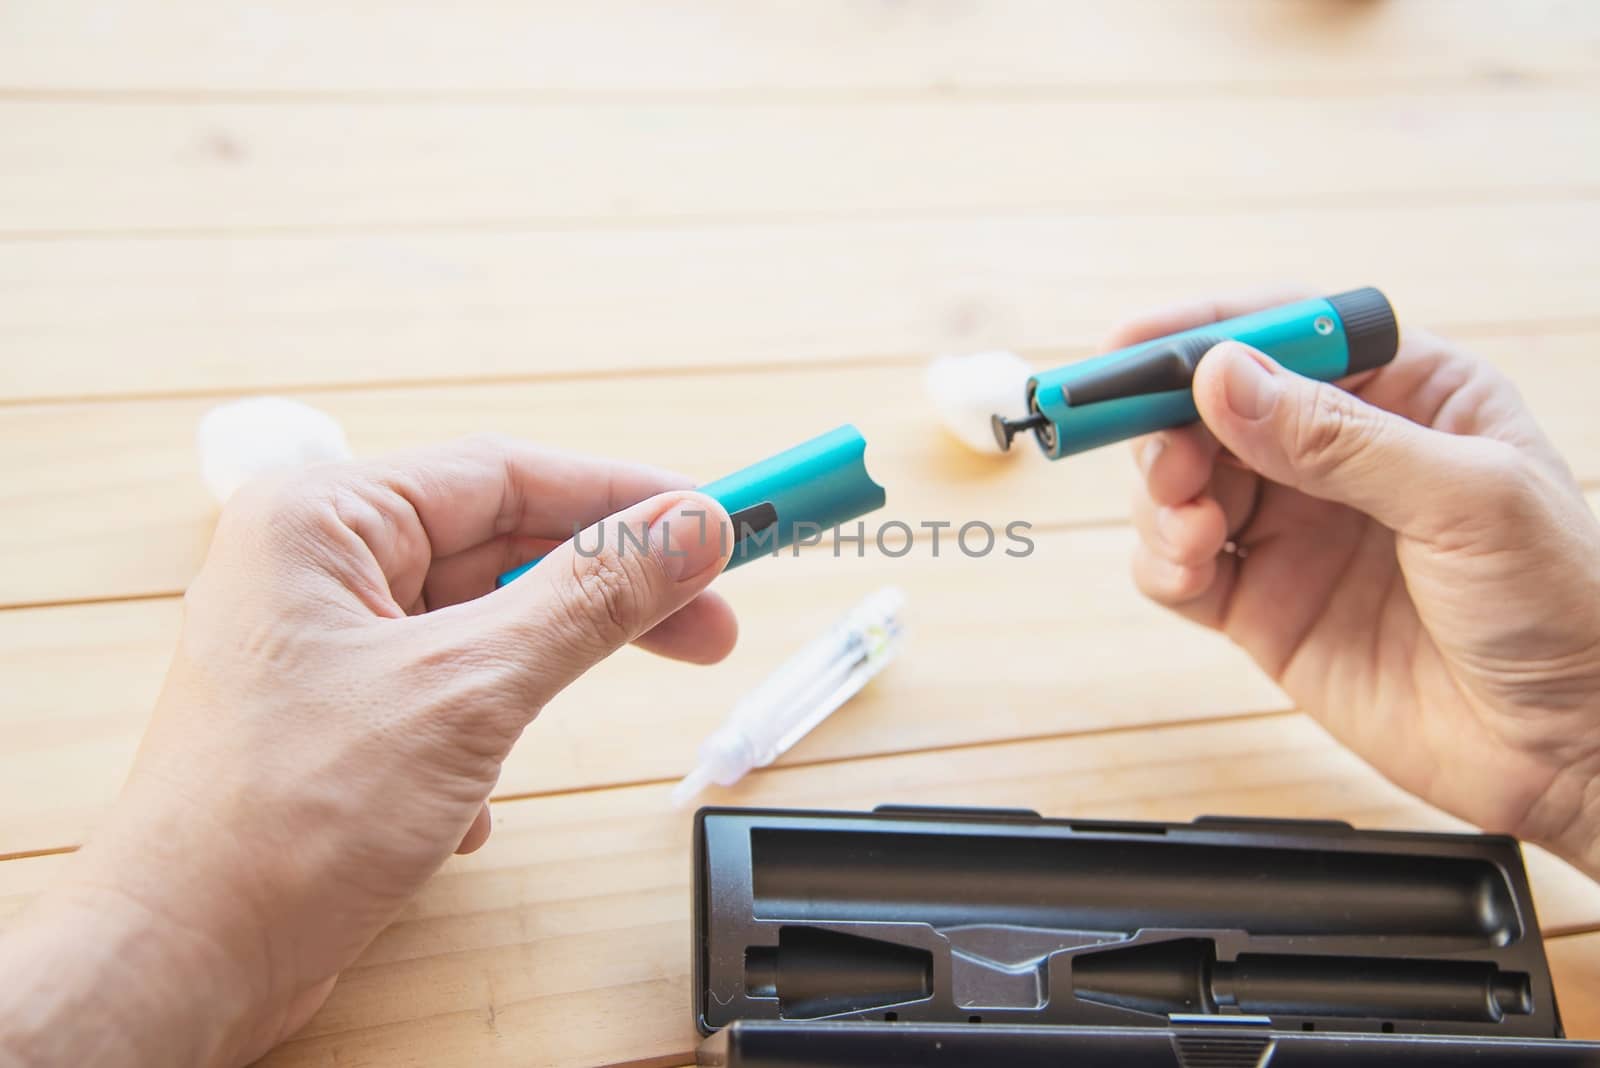 Man preparing insulin diabetic syringe for injection - people diabetic health care concept by pairhandmade